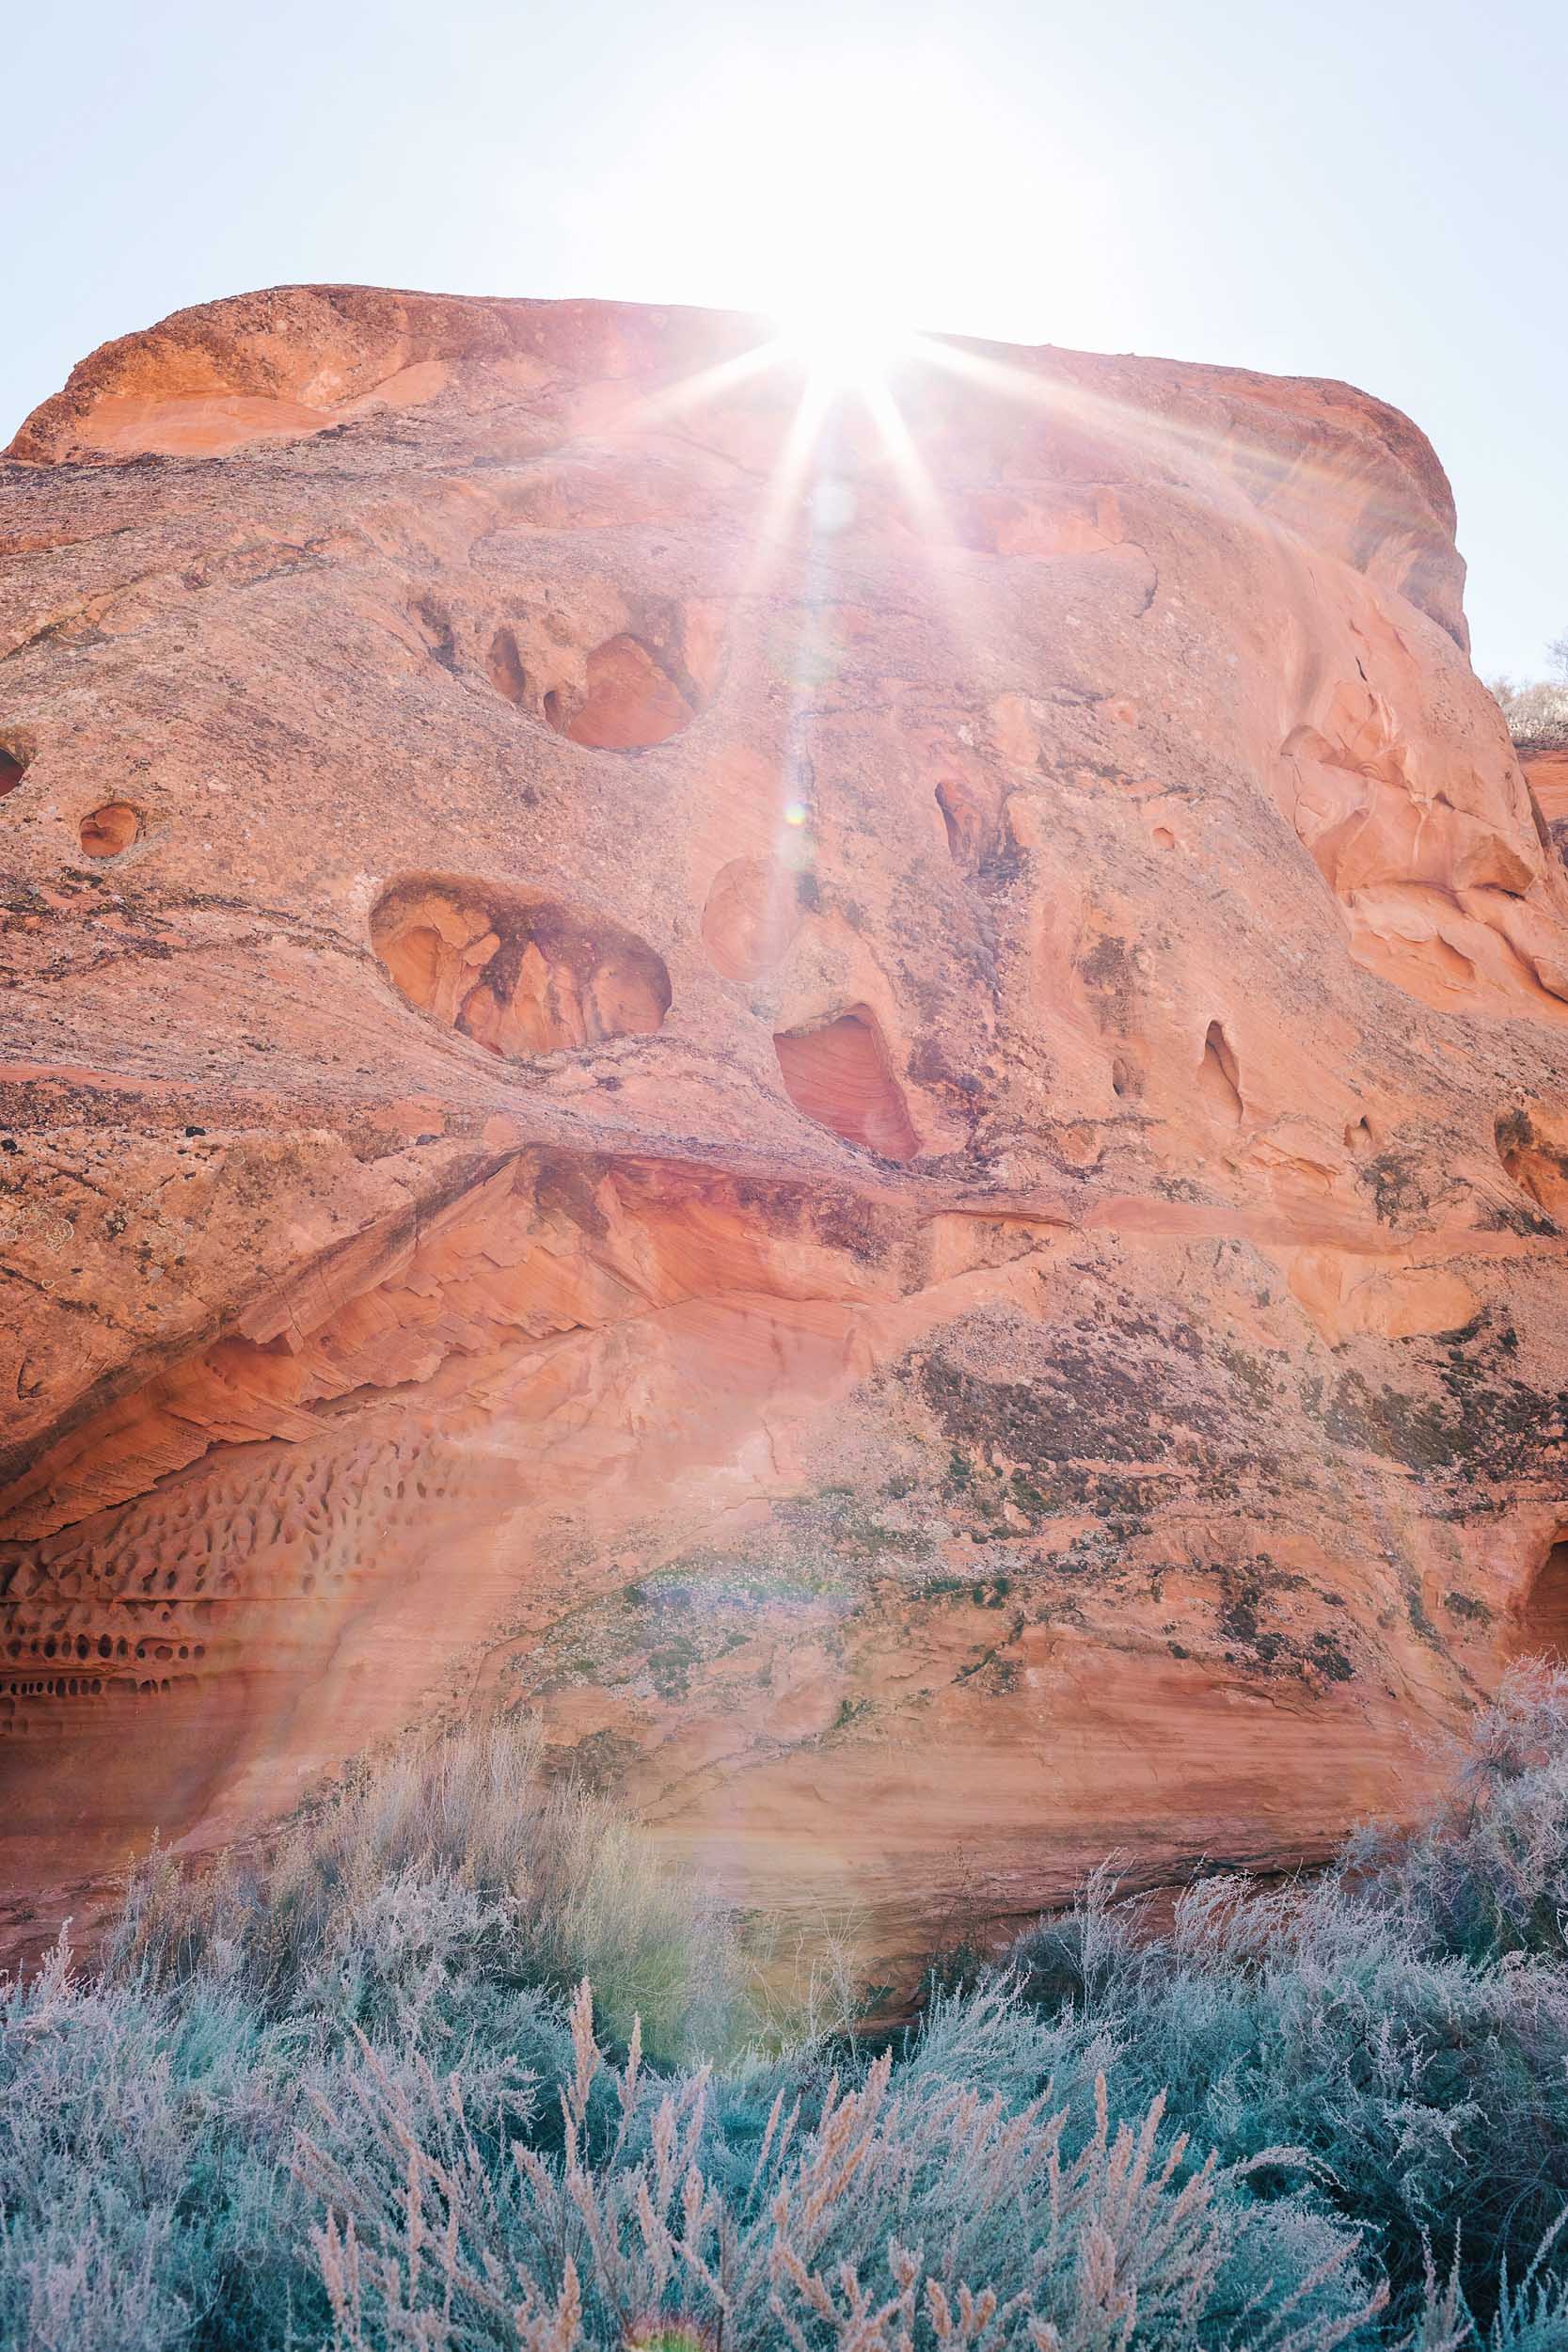 St. George has over 300 days of sunshine each year, which is part of why winter is the best time to visit!